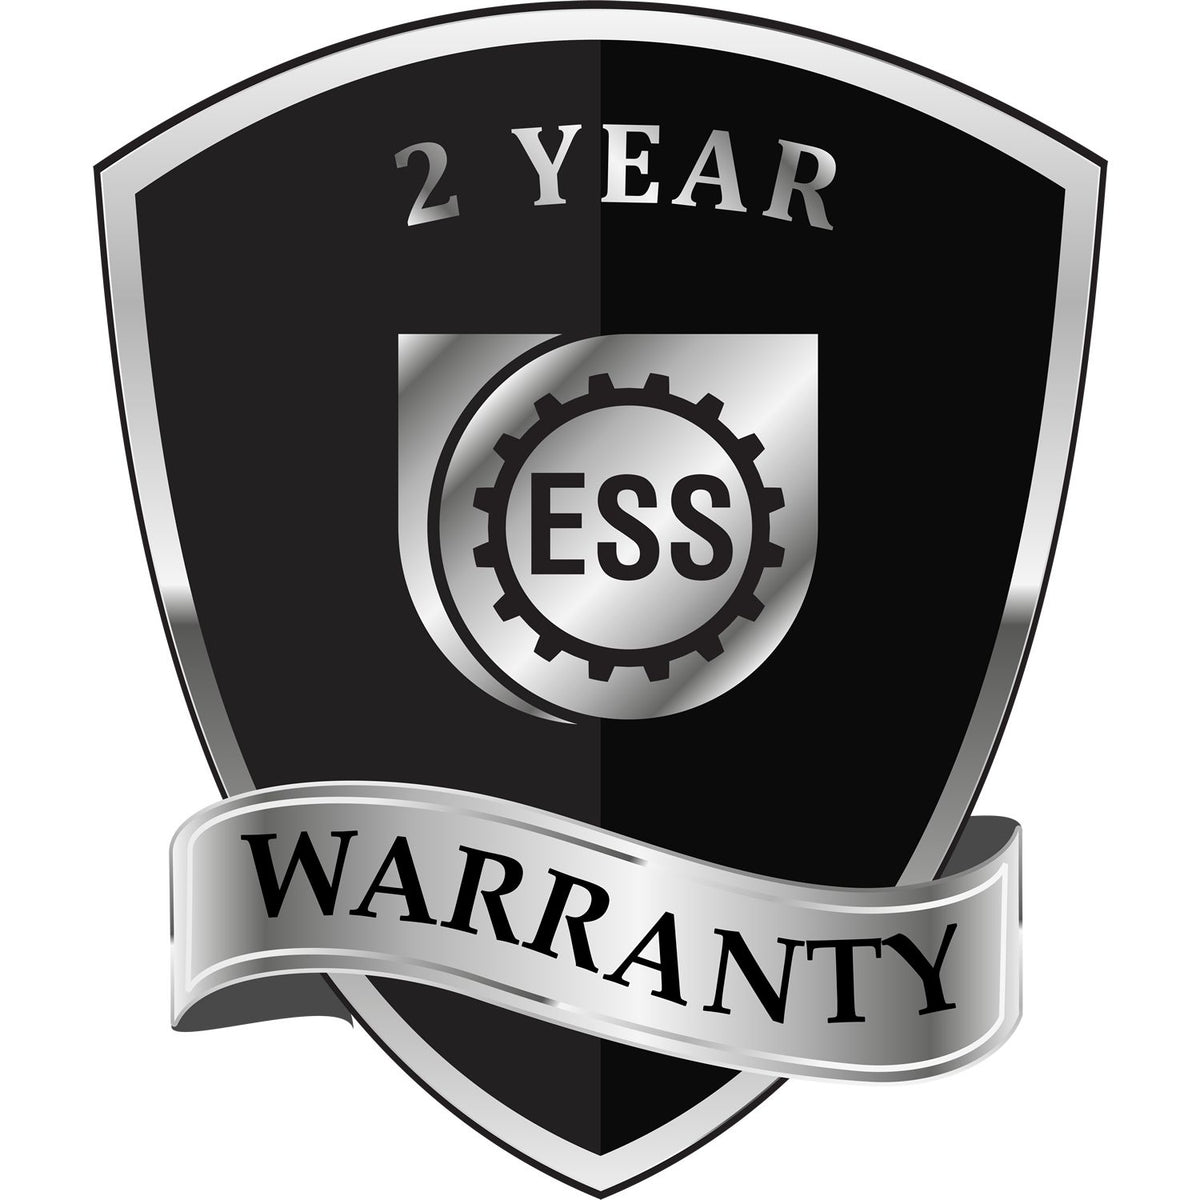 A badge or emblem showing a warranty icon for the Heavy Duty Cast Iron Florida Engineer Seal Embosser